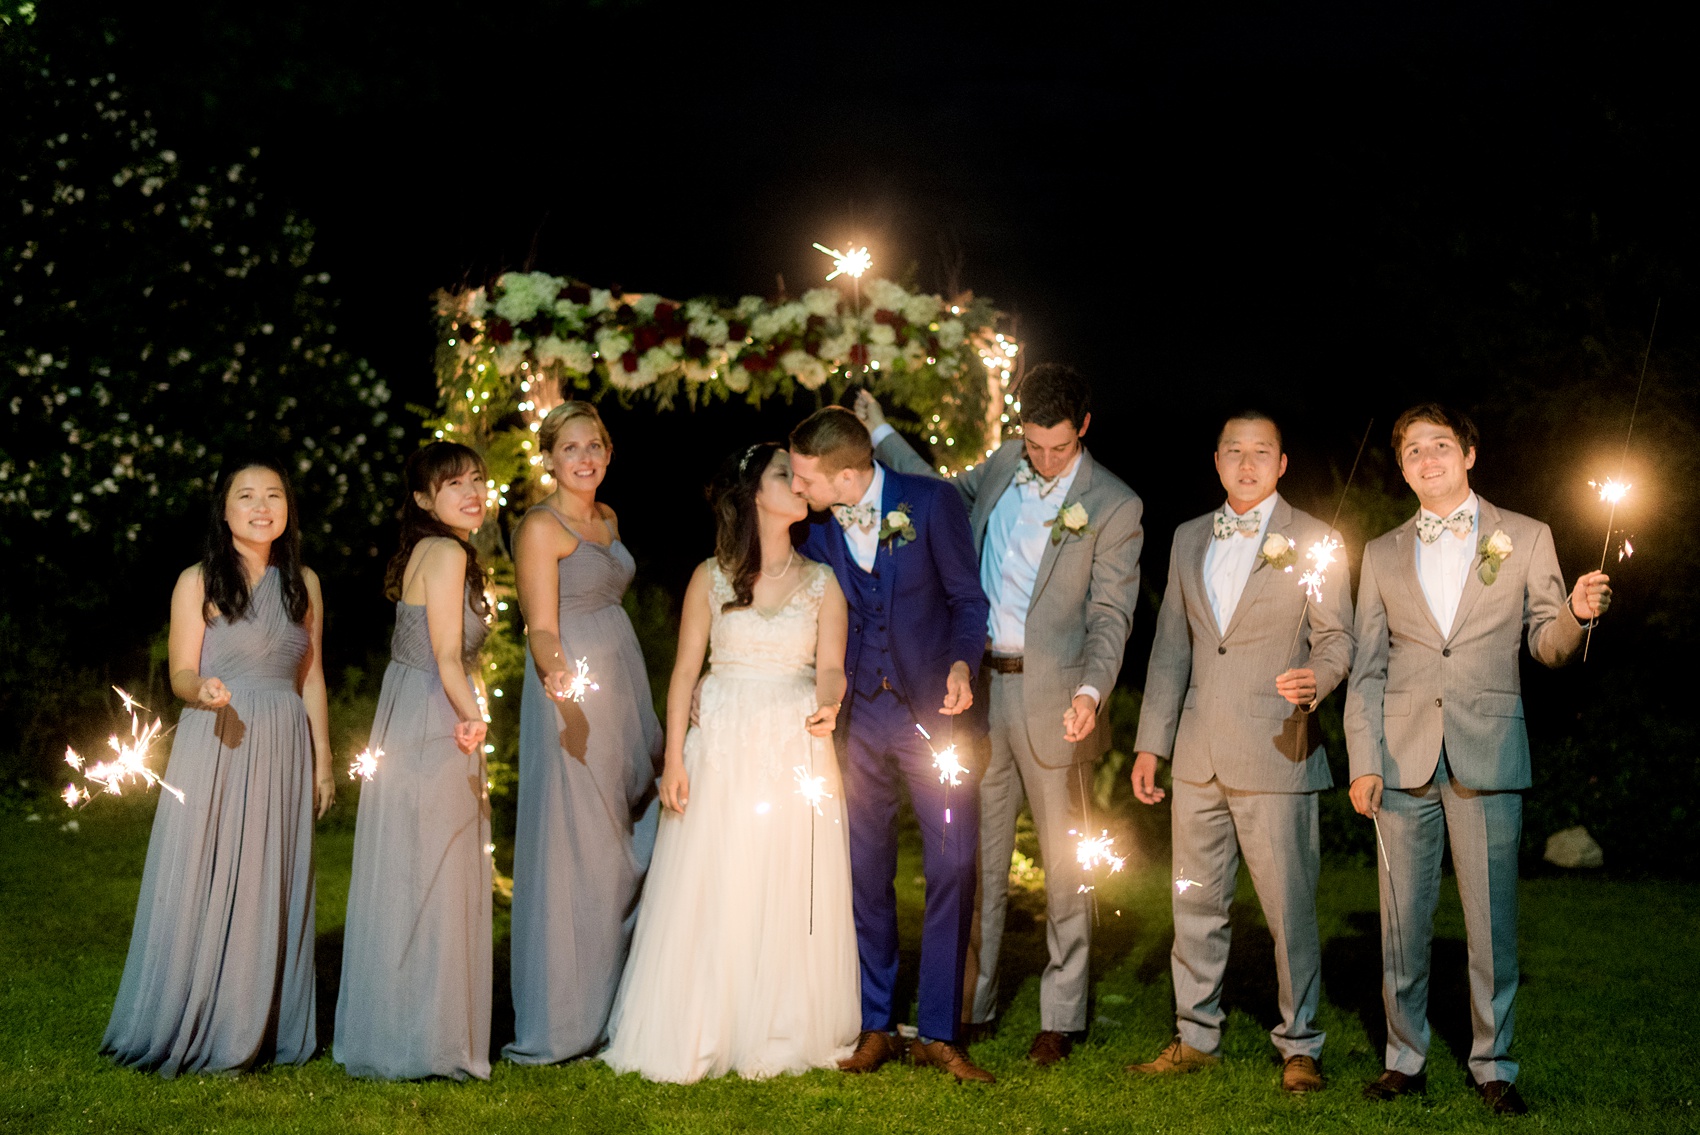 Wedding photos at Crabtree's Kittle House in Chappaqua, New York by Mikkel Paige Photography. The wedding party participated in night time photo sparkler fun at this historic Westchester County venue! Click through to see more from this summer wedding! #mikkelpaige #CrabtreesKittleHouse #WestchesterWeddingVenues #WestchesterWedding #summerwedding #sparklerphotos #weddingparty #nighttimeweddingphotos #nightweddingphotos #weddingpartysparklers